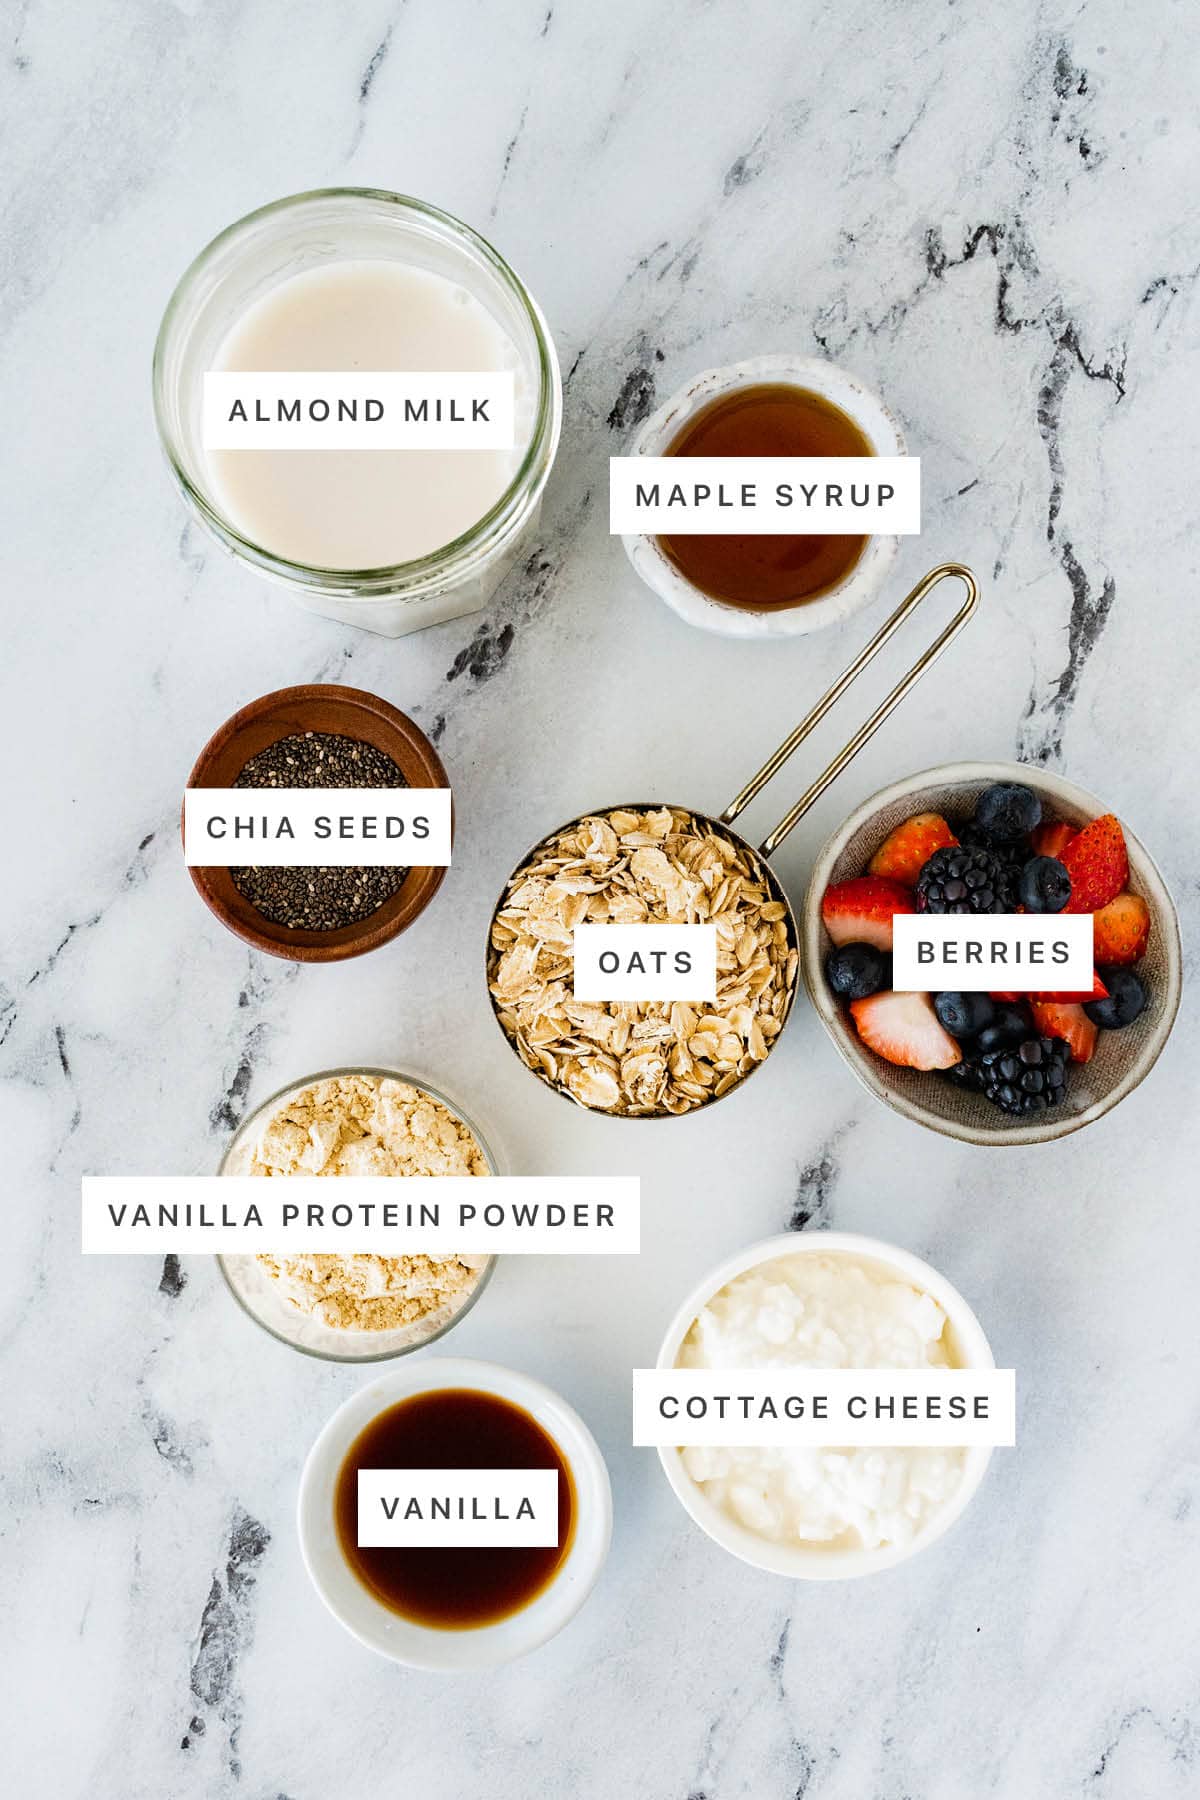 Ingredients measured out to make Cottage Cheese Overnight Oats: almond milk, maple syrup, chia seeds, oats, berries, vanilla protein powder, cottage cheese and vanilla.